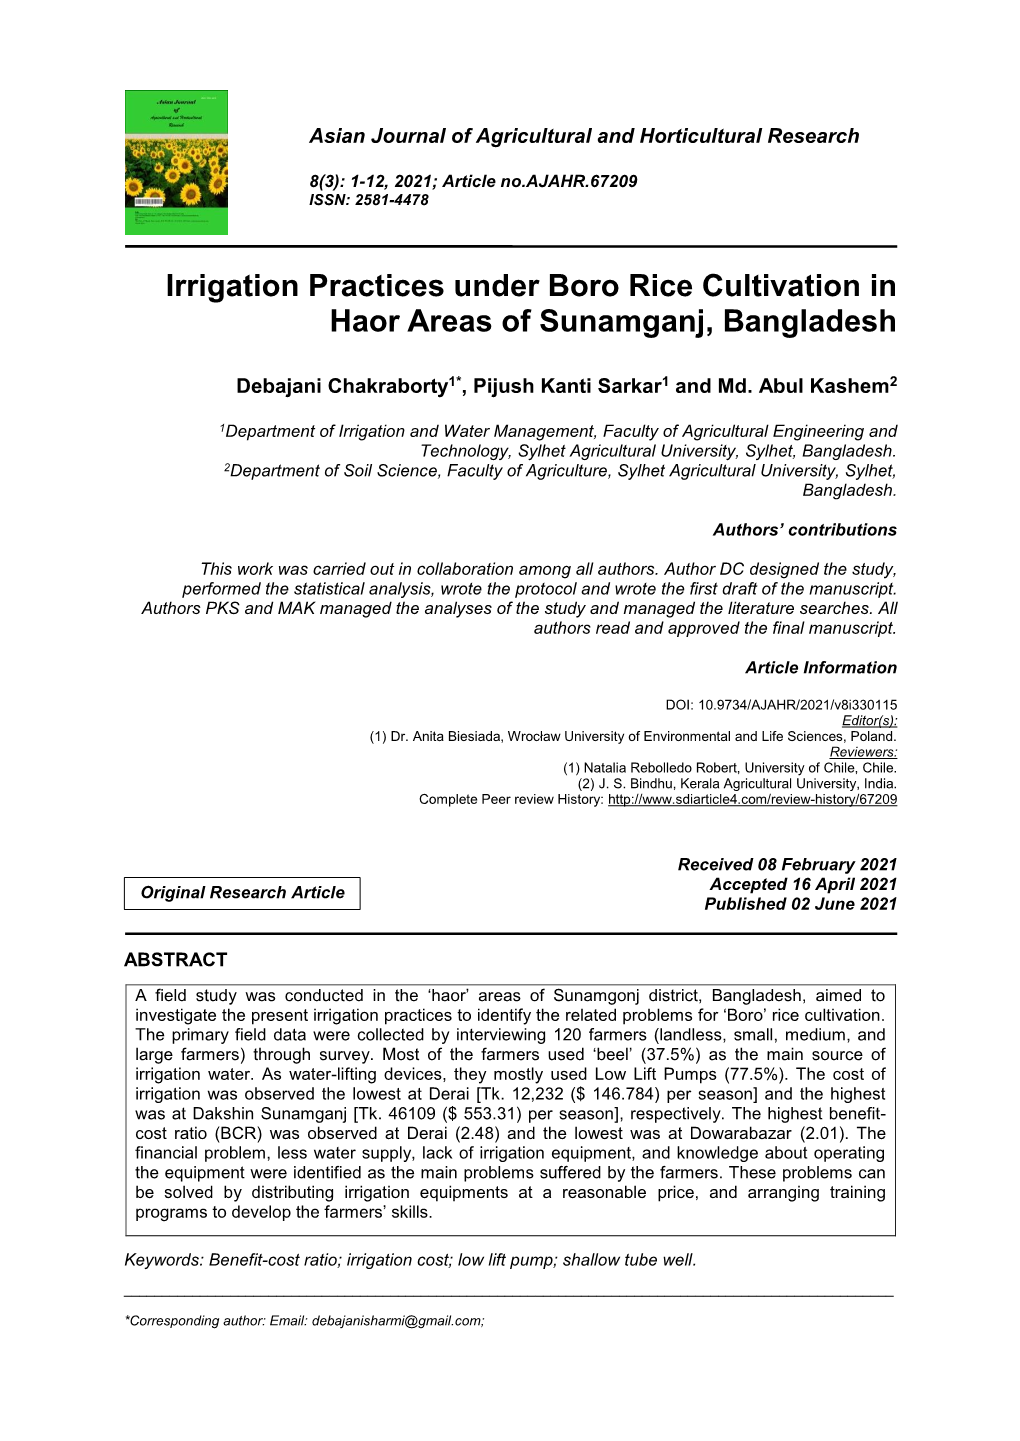 Irrigation Practices Under Boro Rice Cultivation in Haor Areas of Sunamganj, Bangladesh